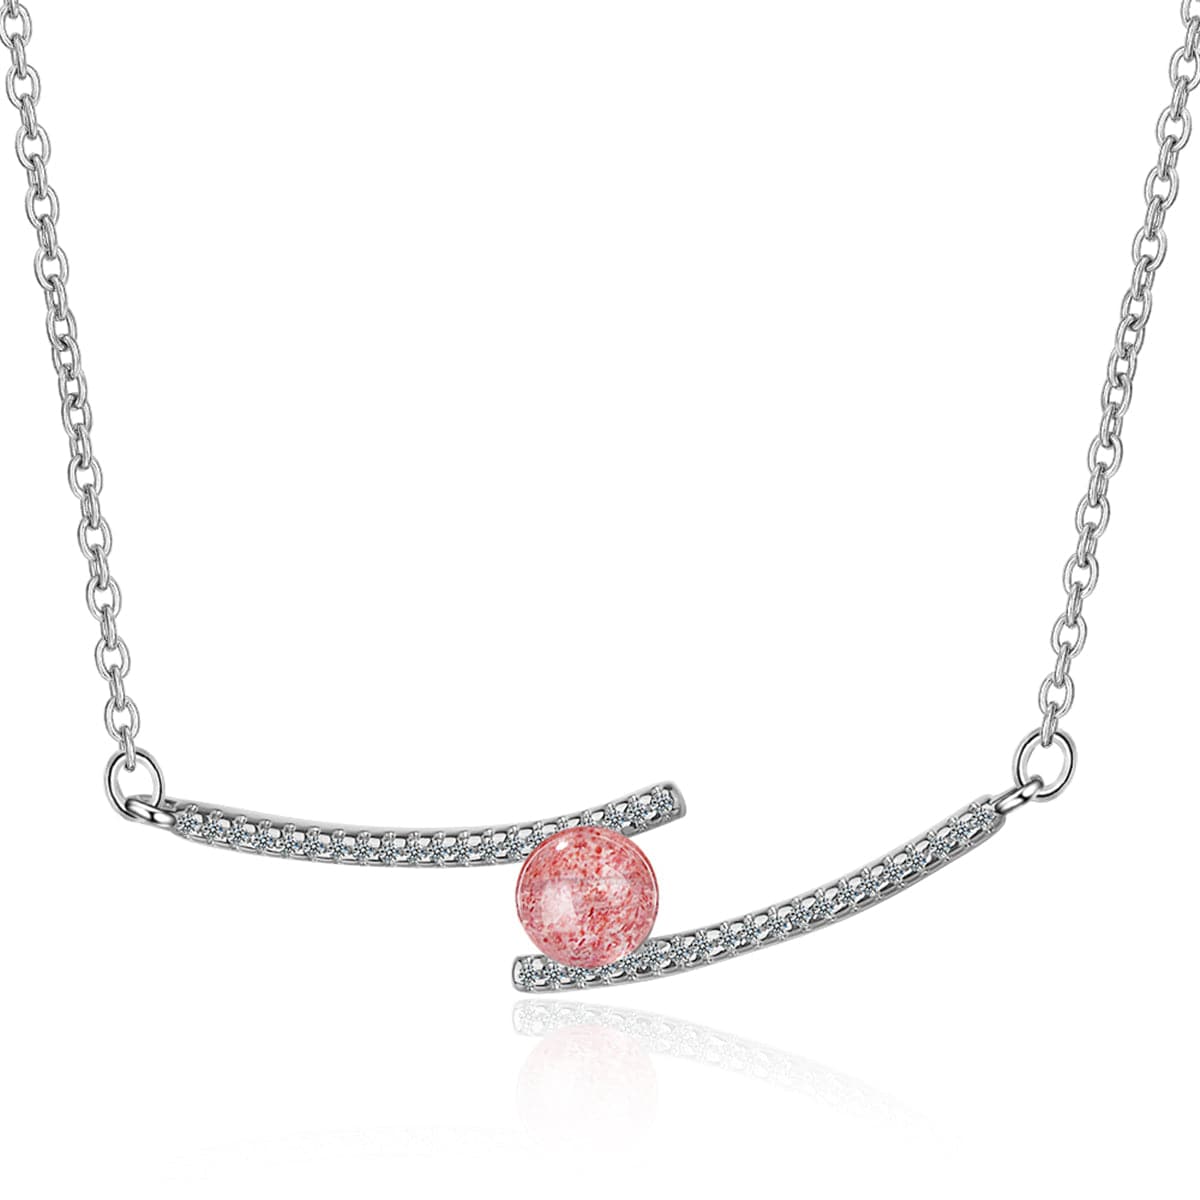 Strawberry Red Crystal & Silvvertone Pendant Necklace